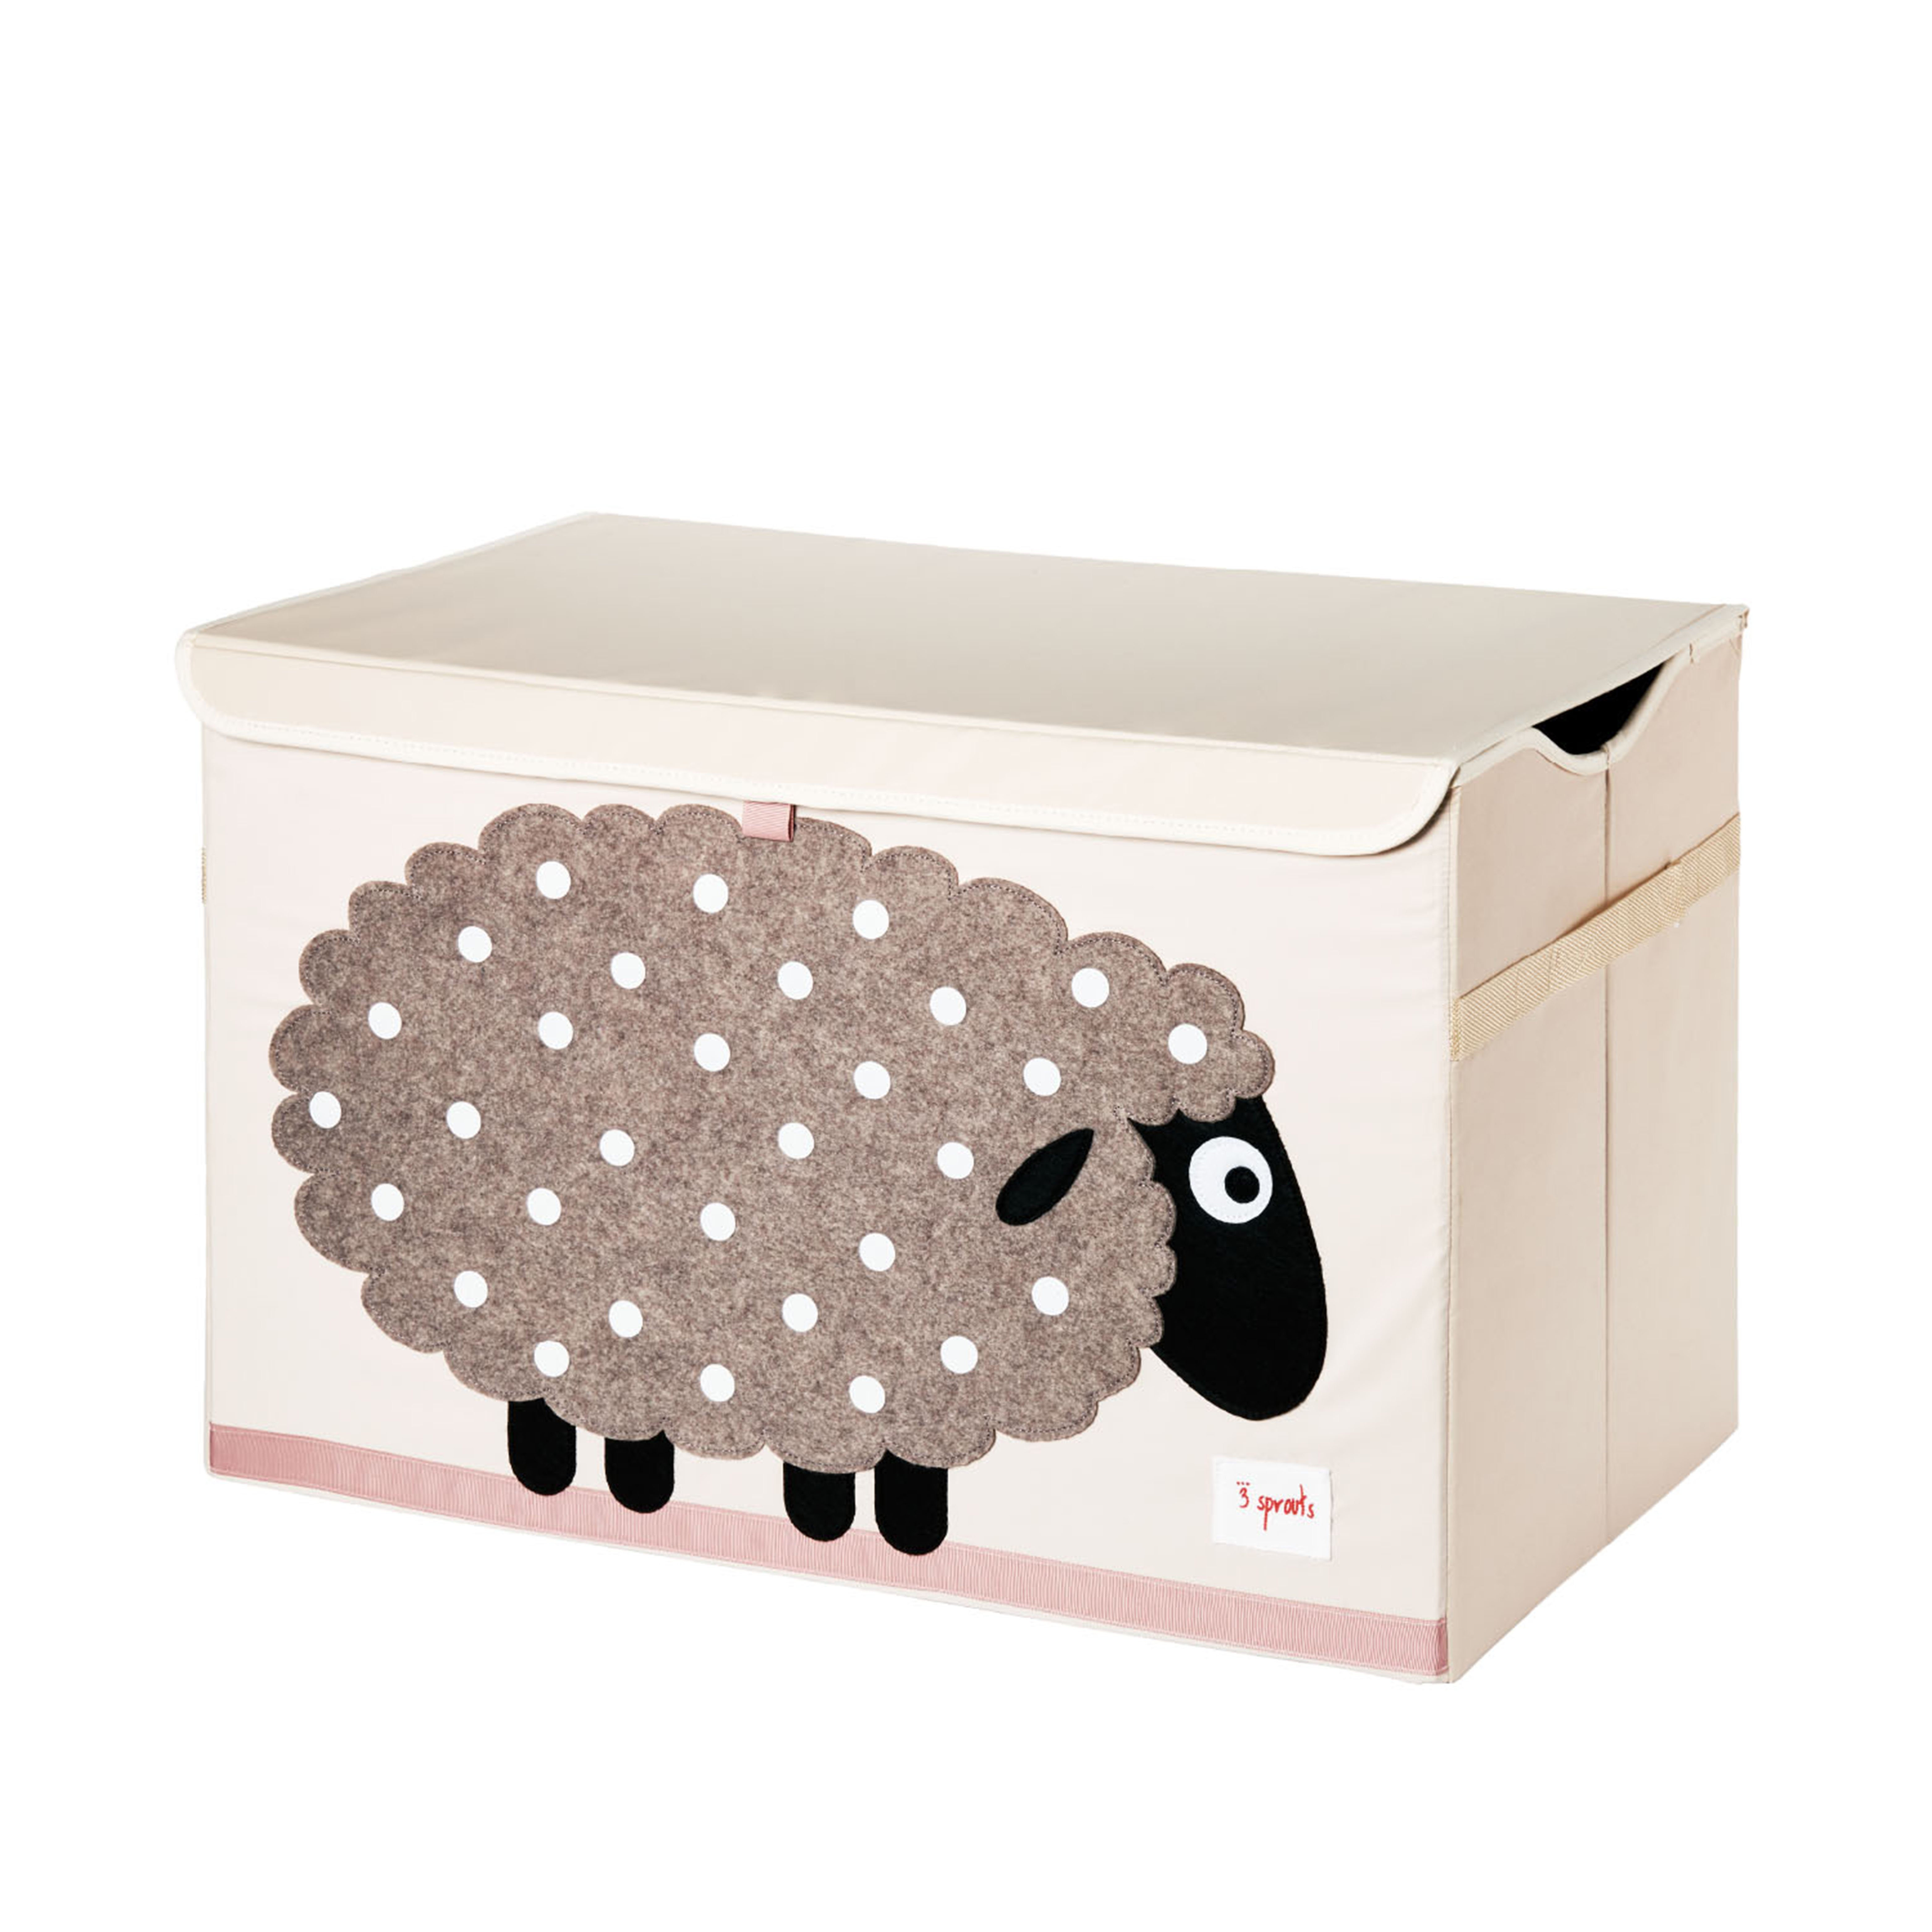 3 Sprouts - Toy Chest - Beige Sheep - Baby og barn